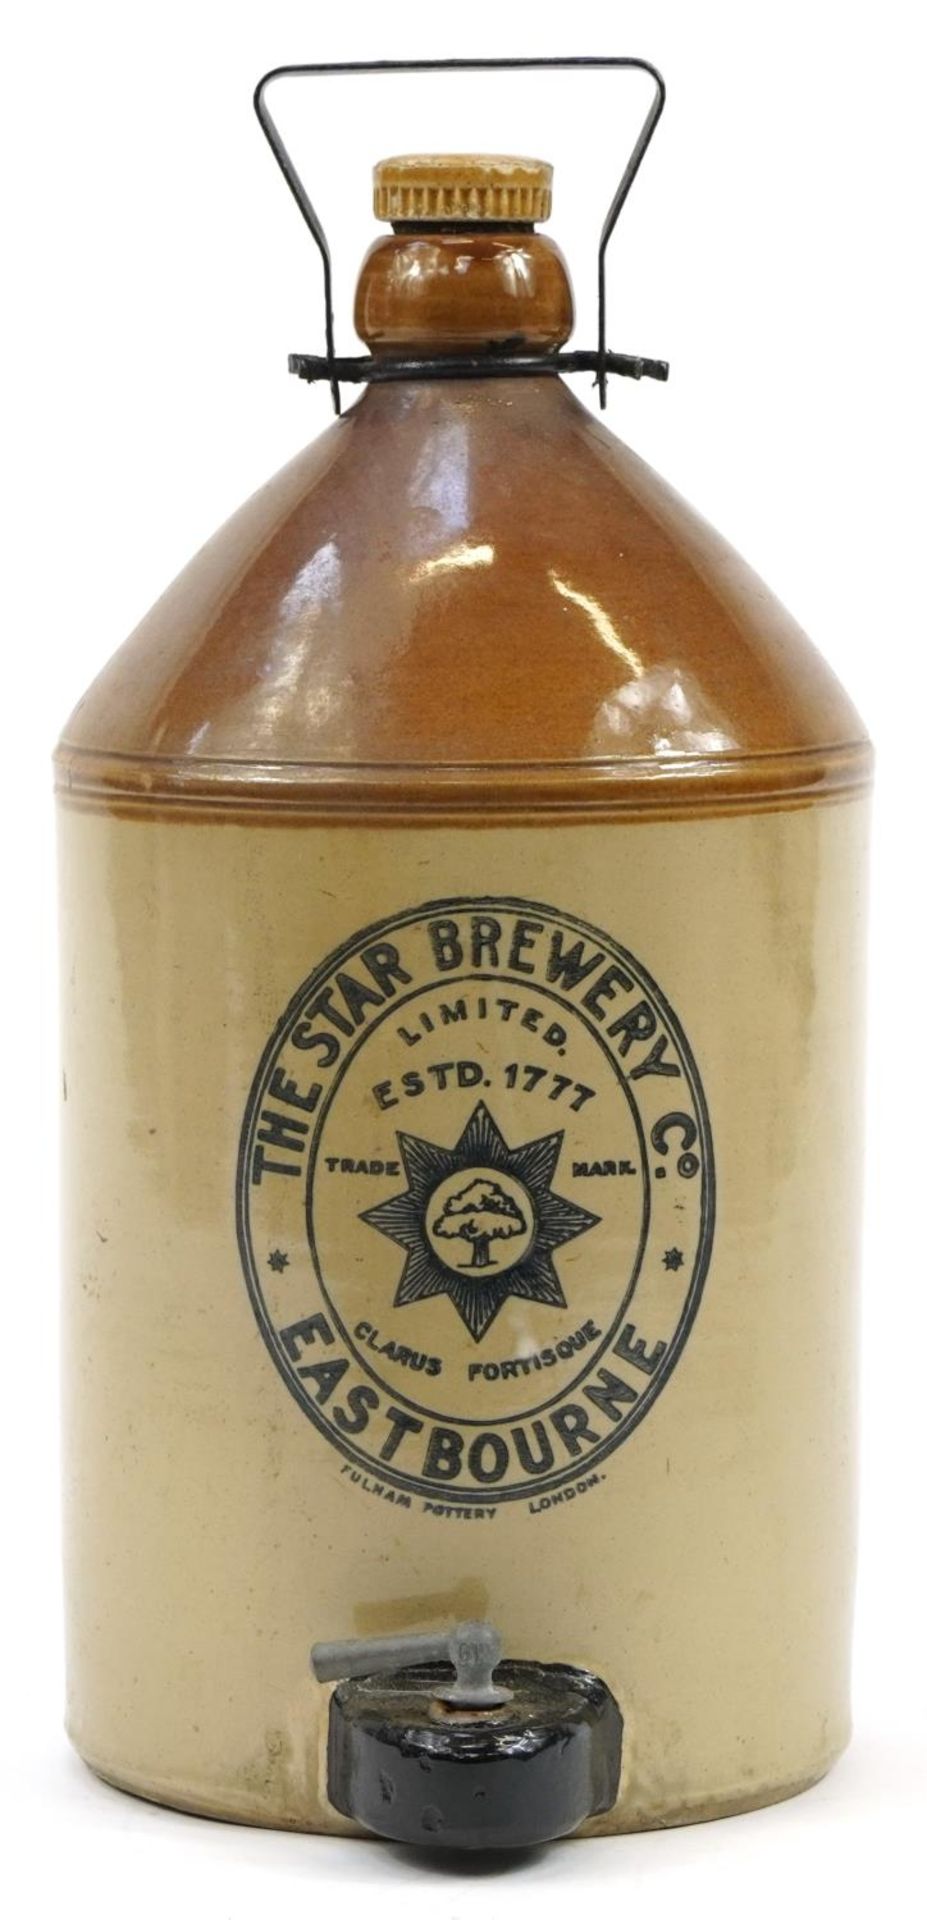 Star Brewery Co of Eastbourne stoneware advertising flagon, 44cm high